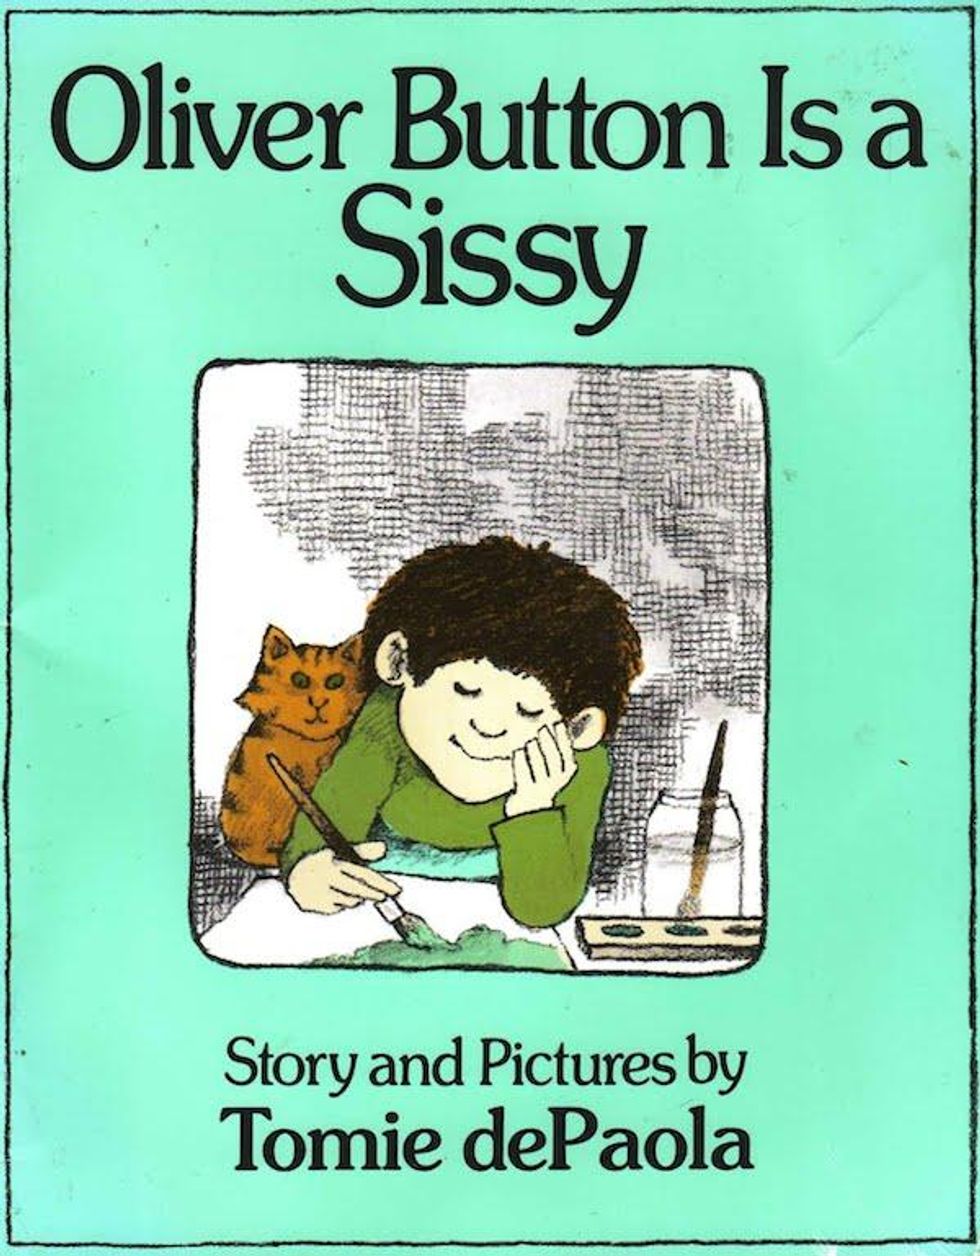 Oliver Button Is A Sissy, by Tomie dePaola